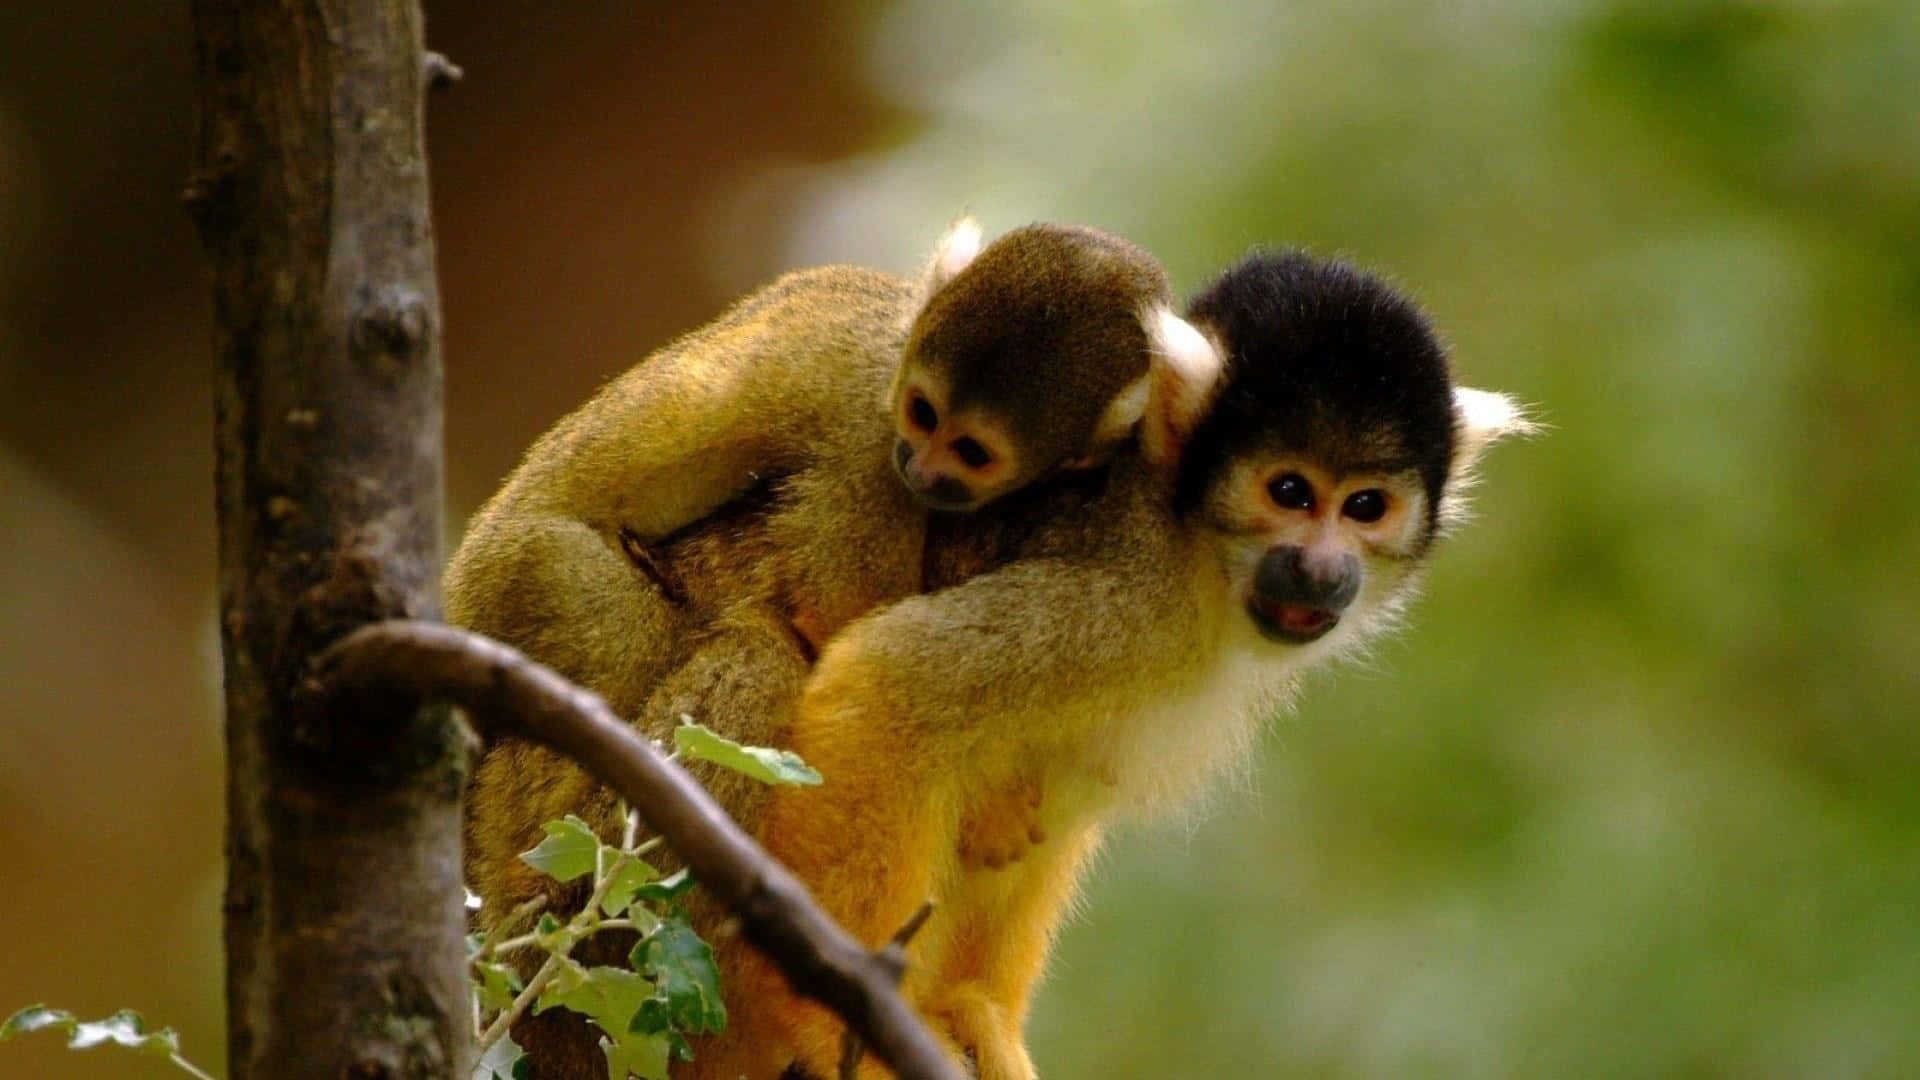 Aww, how cute is this little monkey!